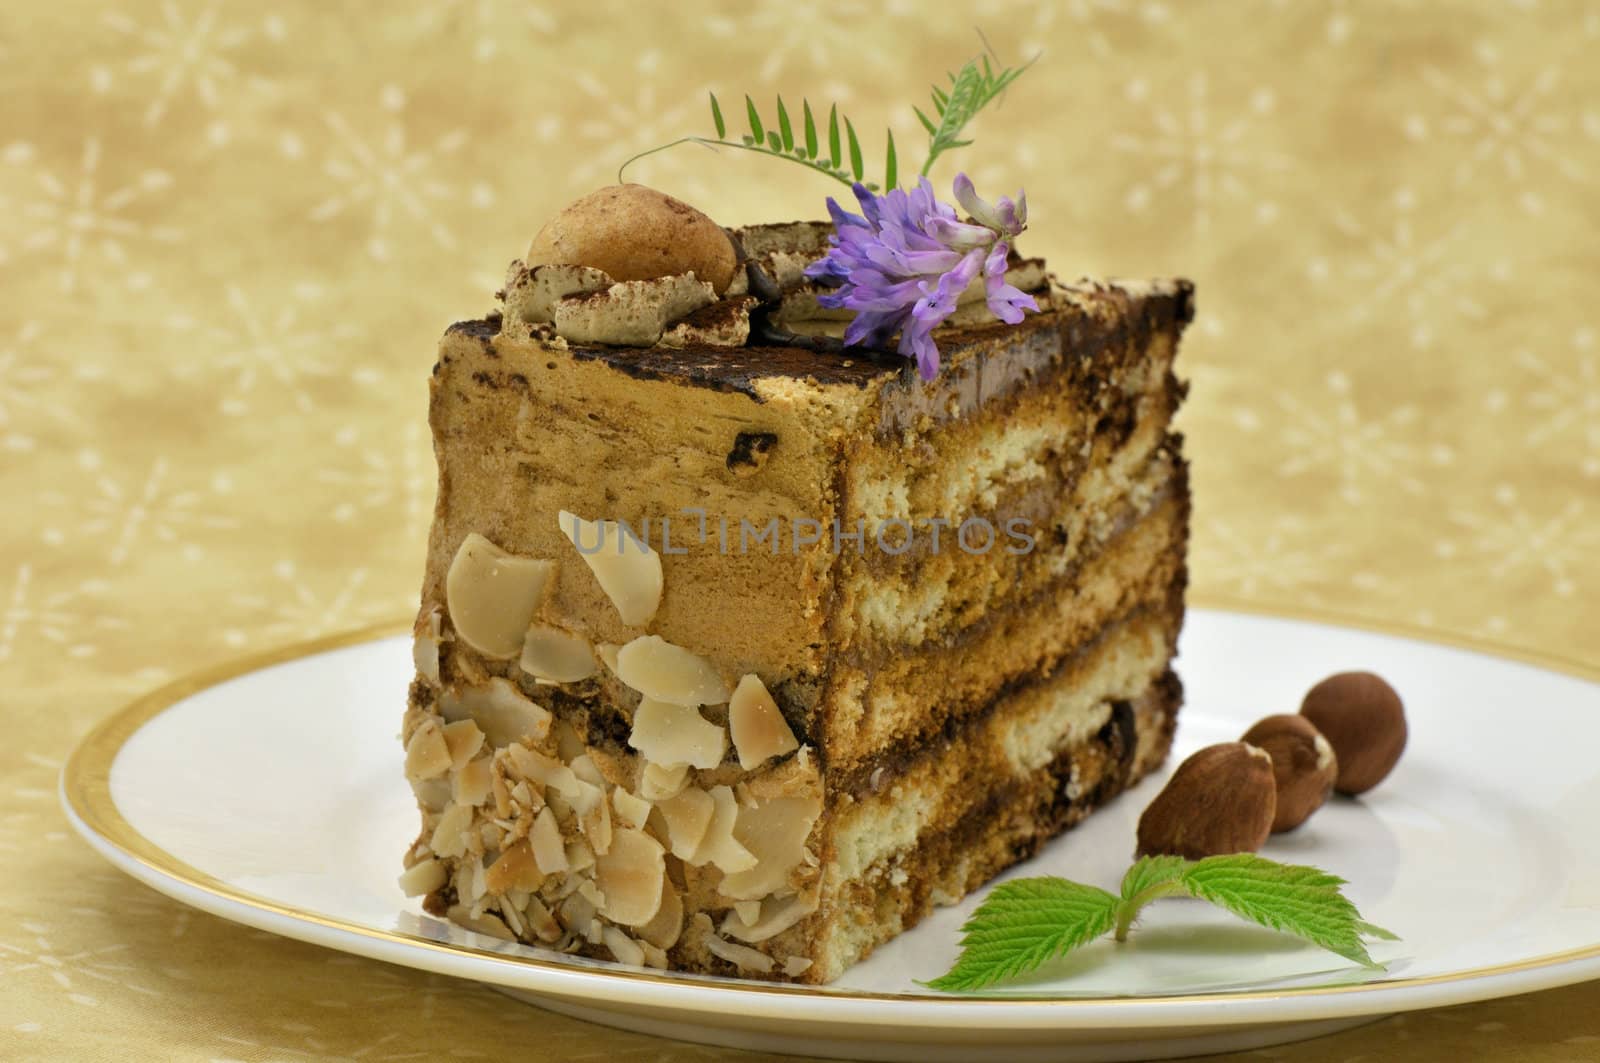 Hazelnut and chocolate cake slice decorated with leaves and purple flower